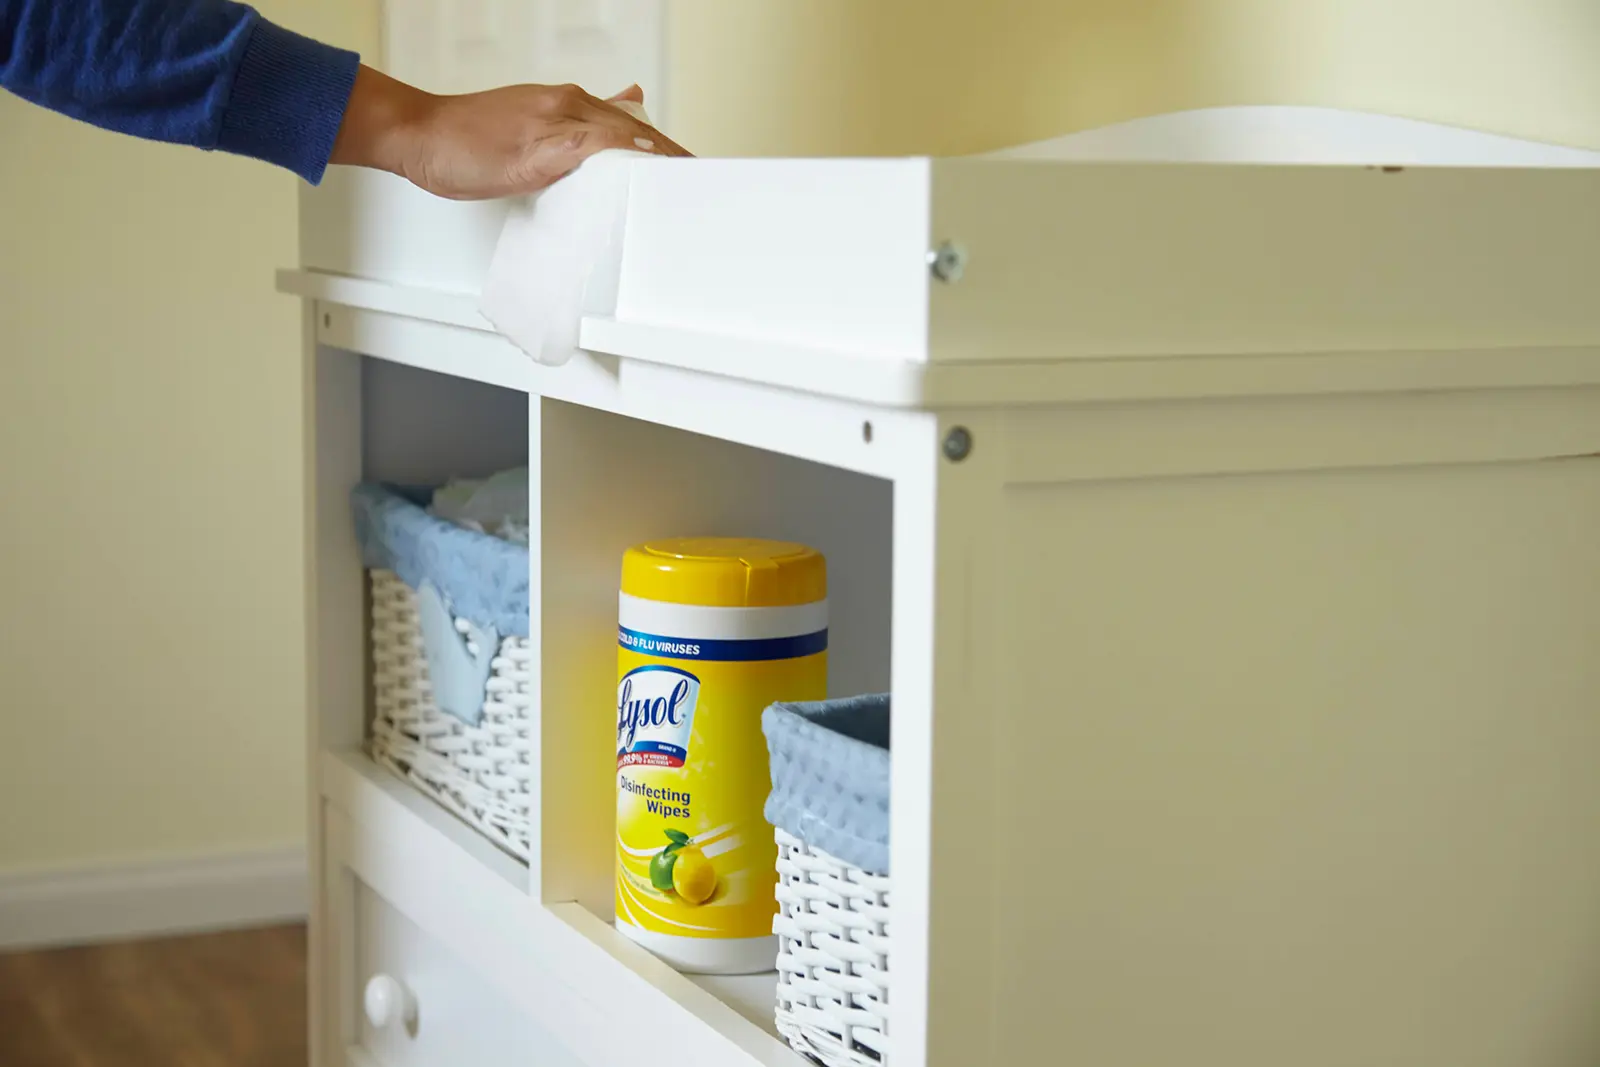 Person wiping cabinet with baskets and canister of Lysol Disinfecting Wipes on shelf